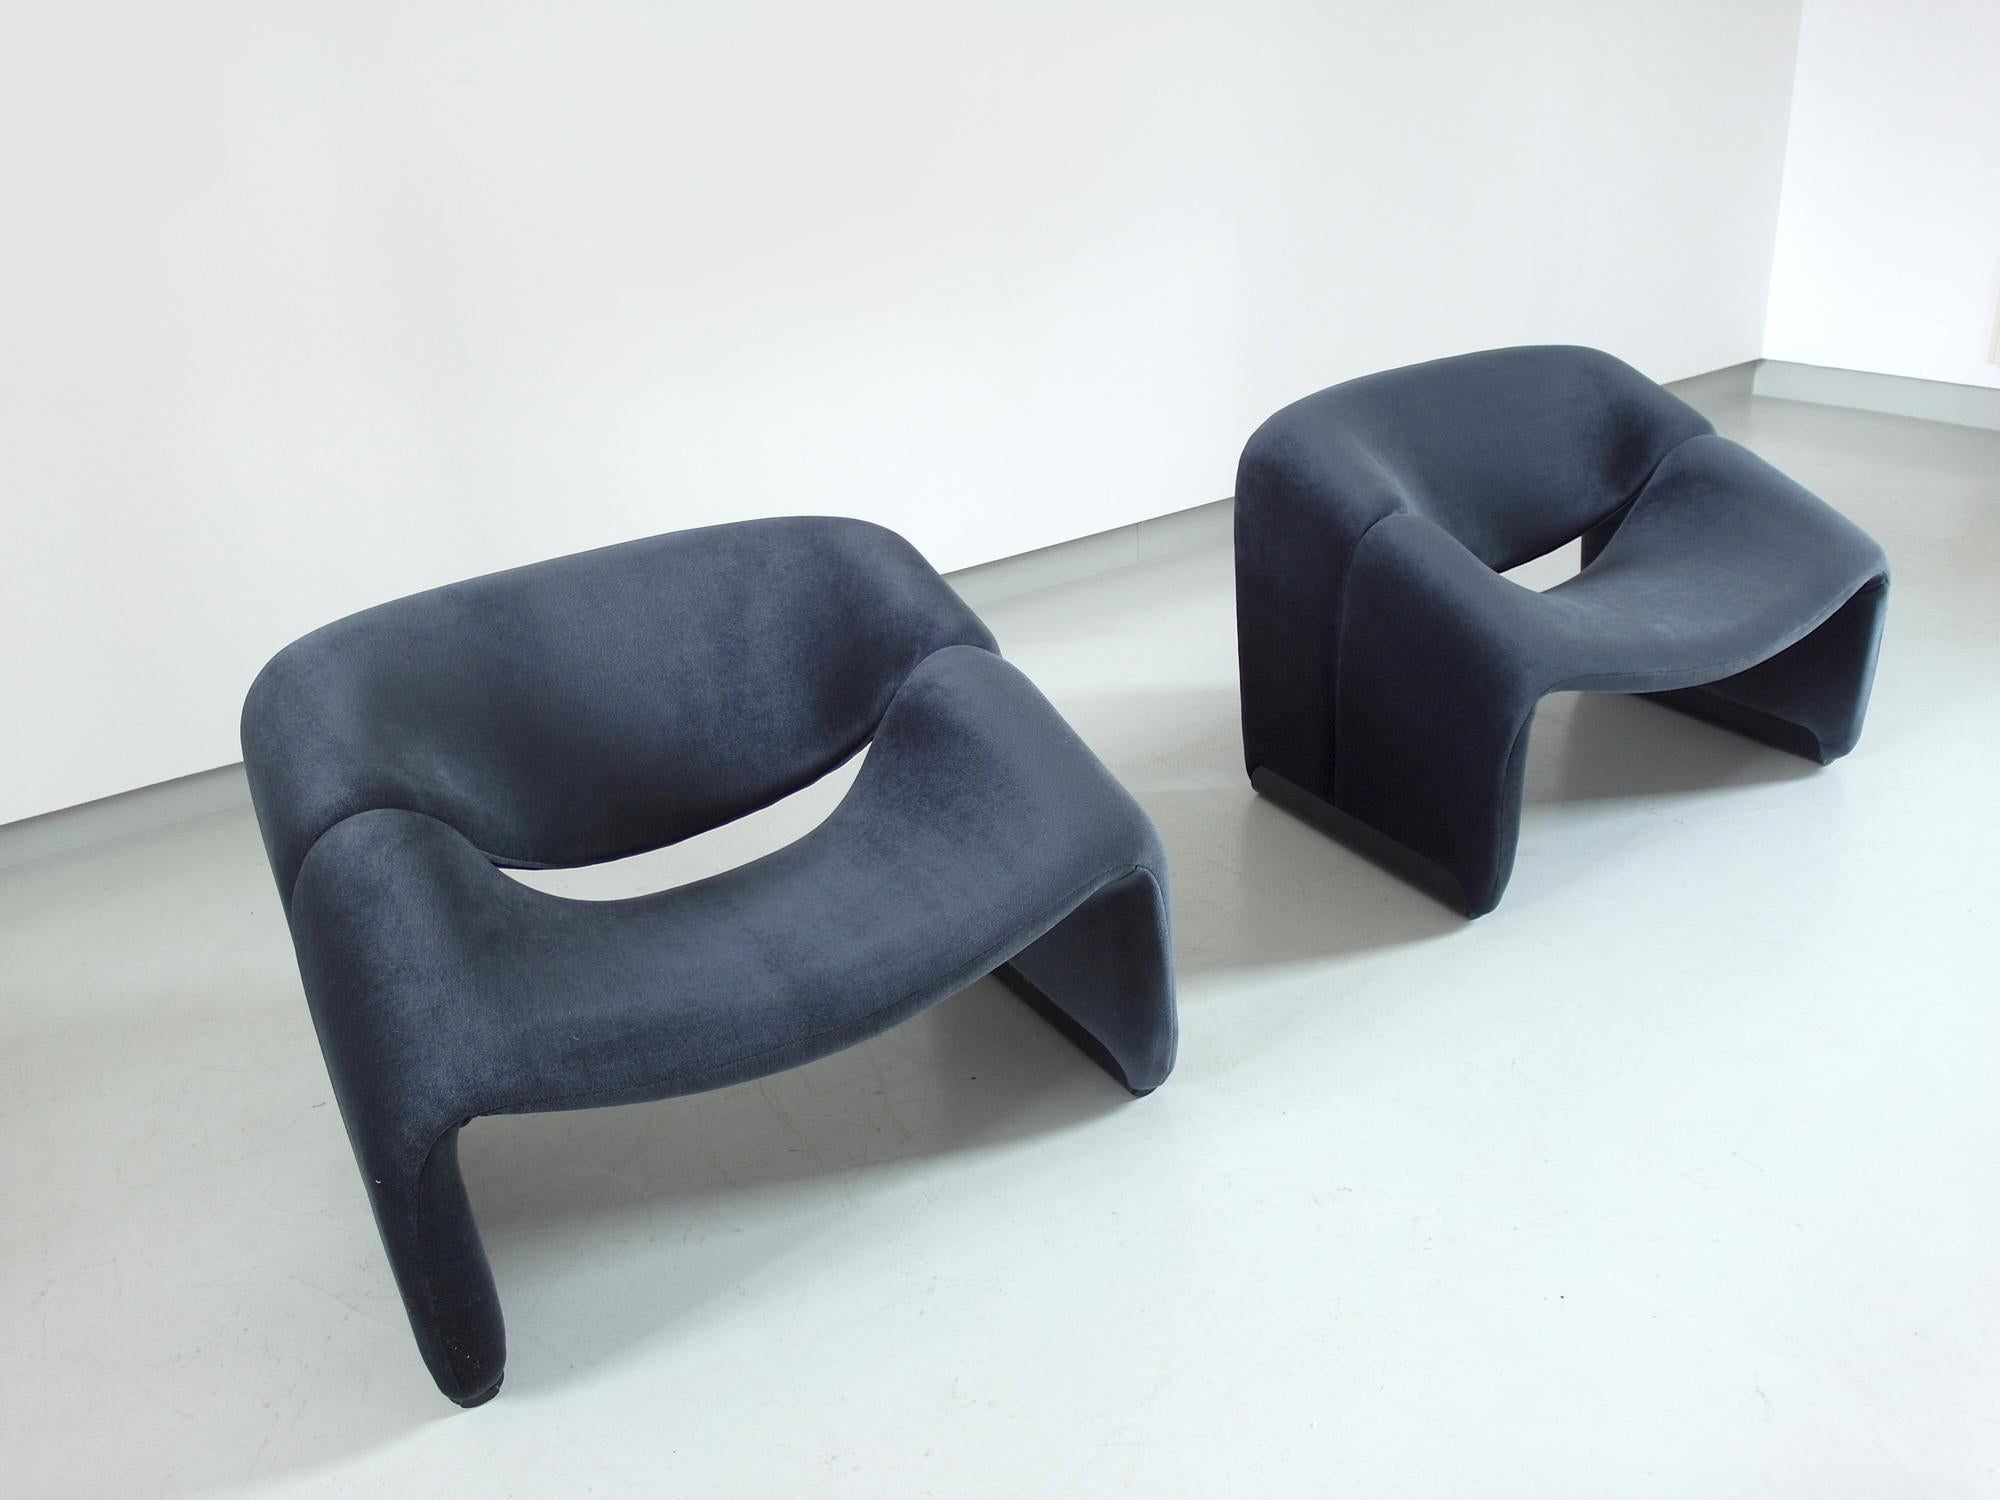 A perfect pair of velvet upholstered groovy chairs, or model F598 chairs, designed by Pierre Paulin for Artifort, The Netherlands 1973.
This sculptural pair of lounge chairs has been delicately upholstered in a grey/black velvet which strengthens